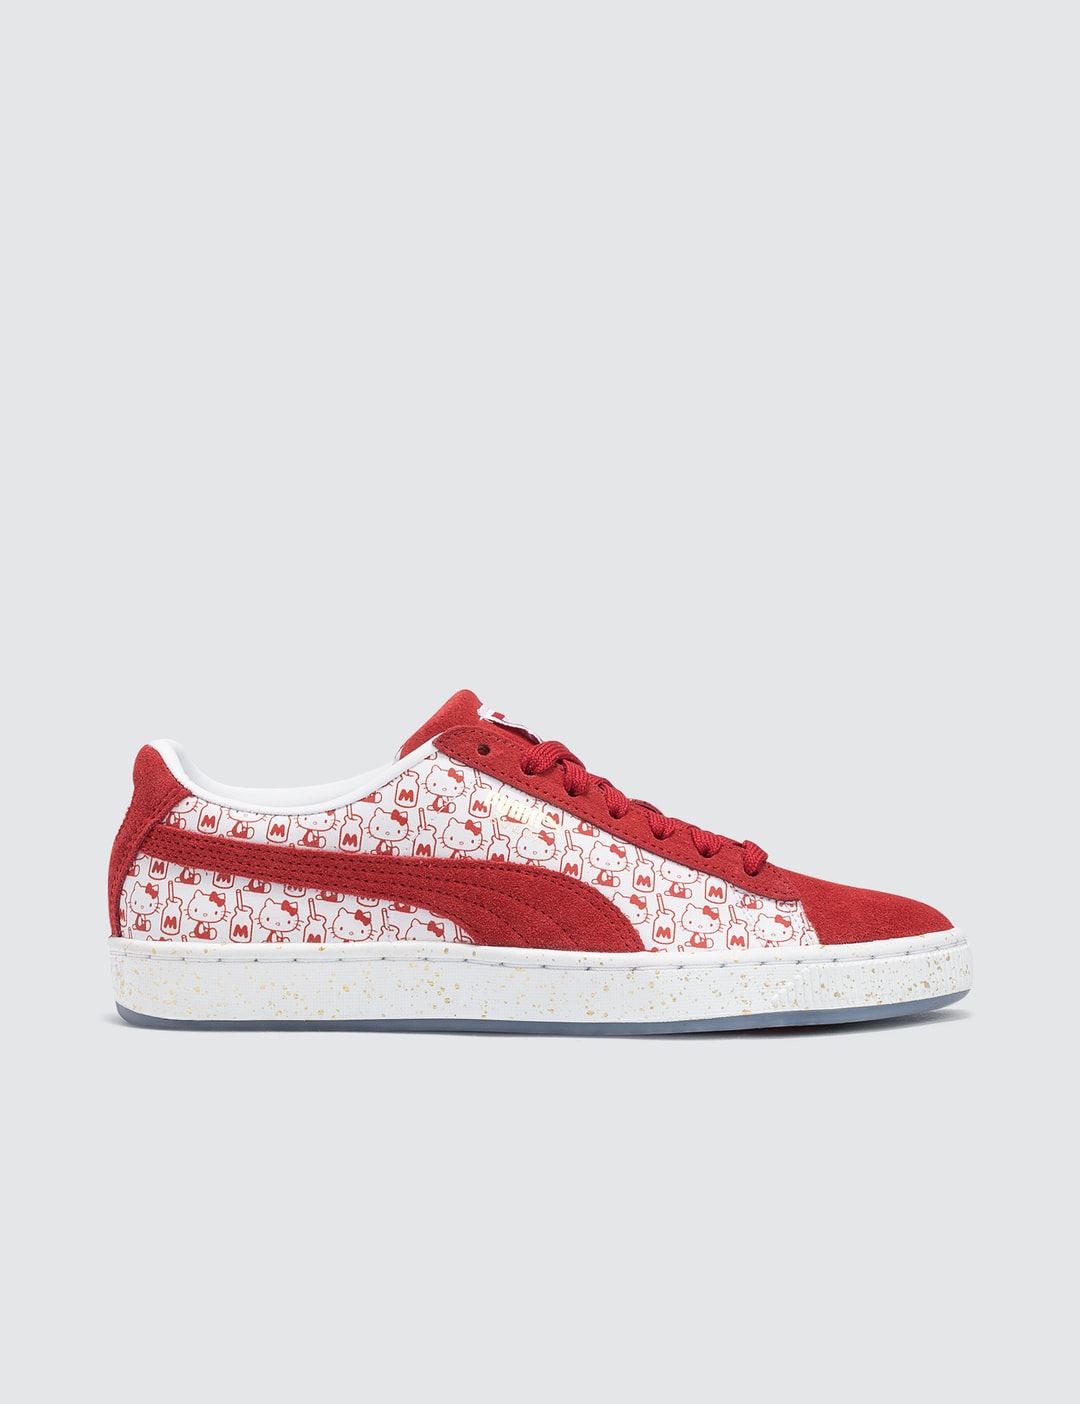 Puma - Puma X Hello Kitty Suede Classic - Globally Curated and Lifestyle by